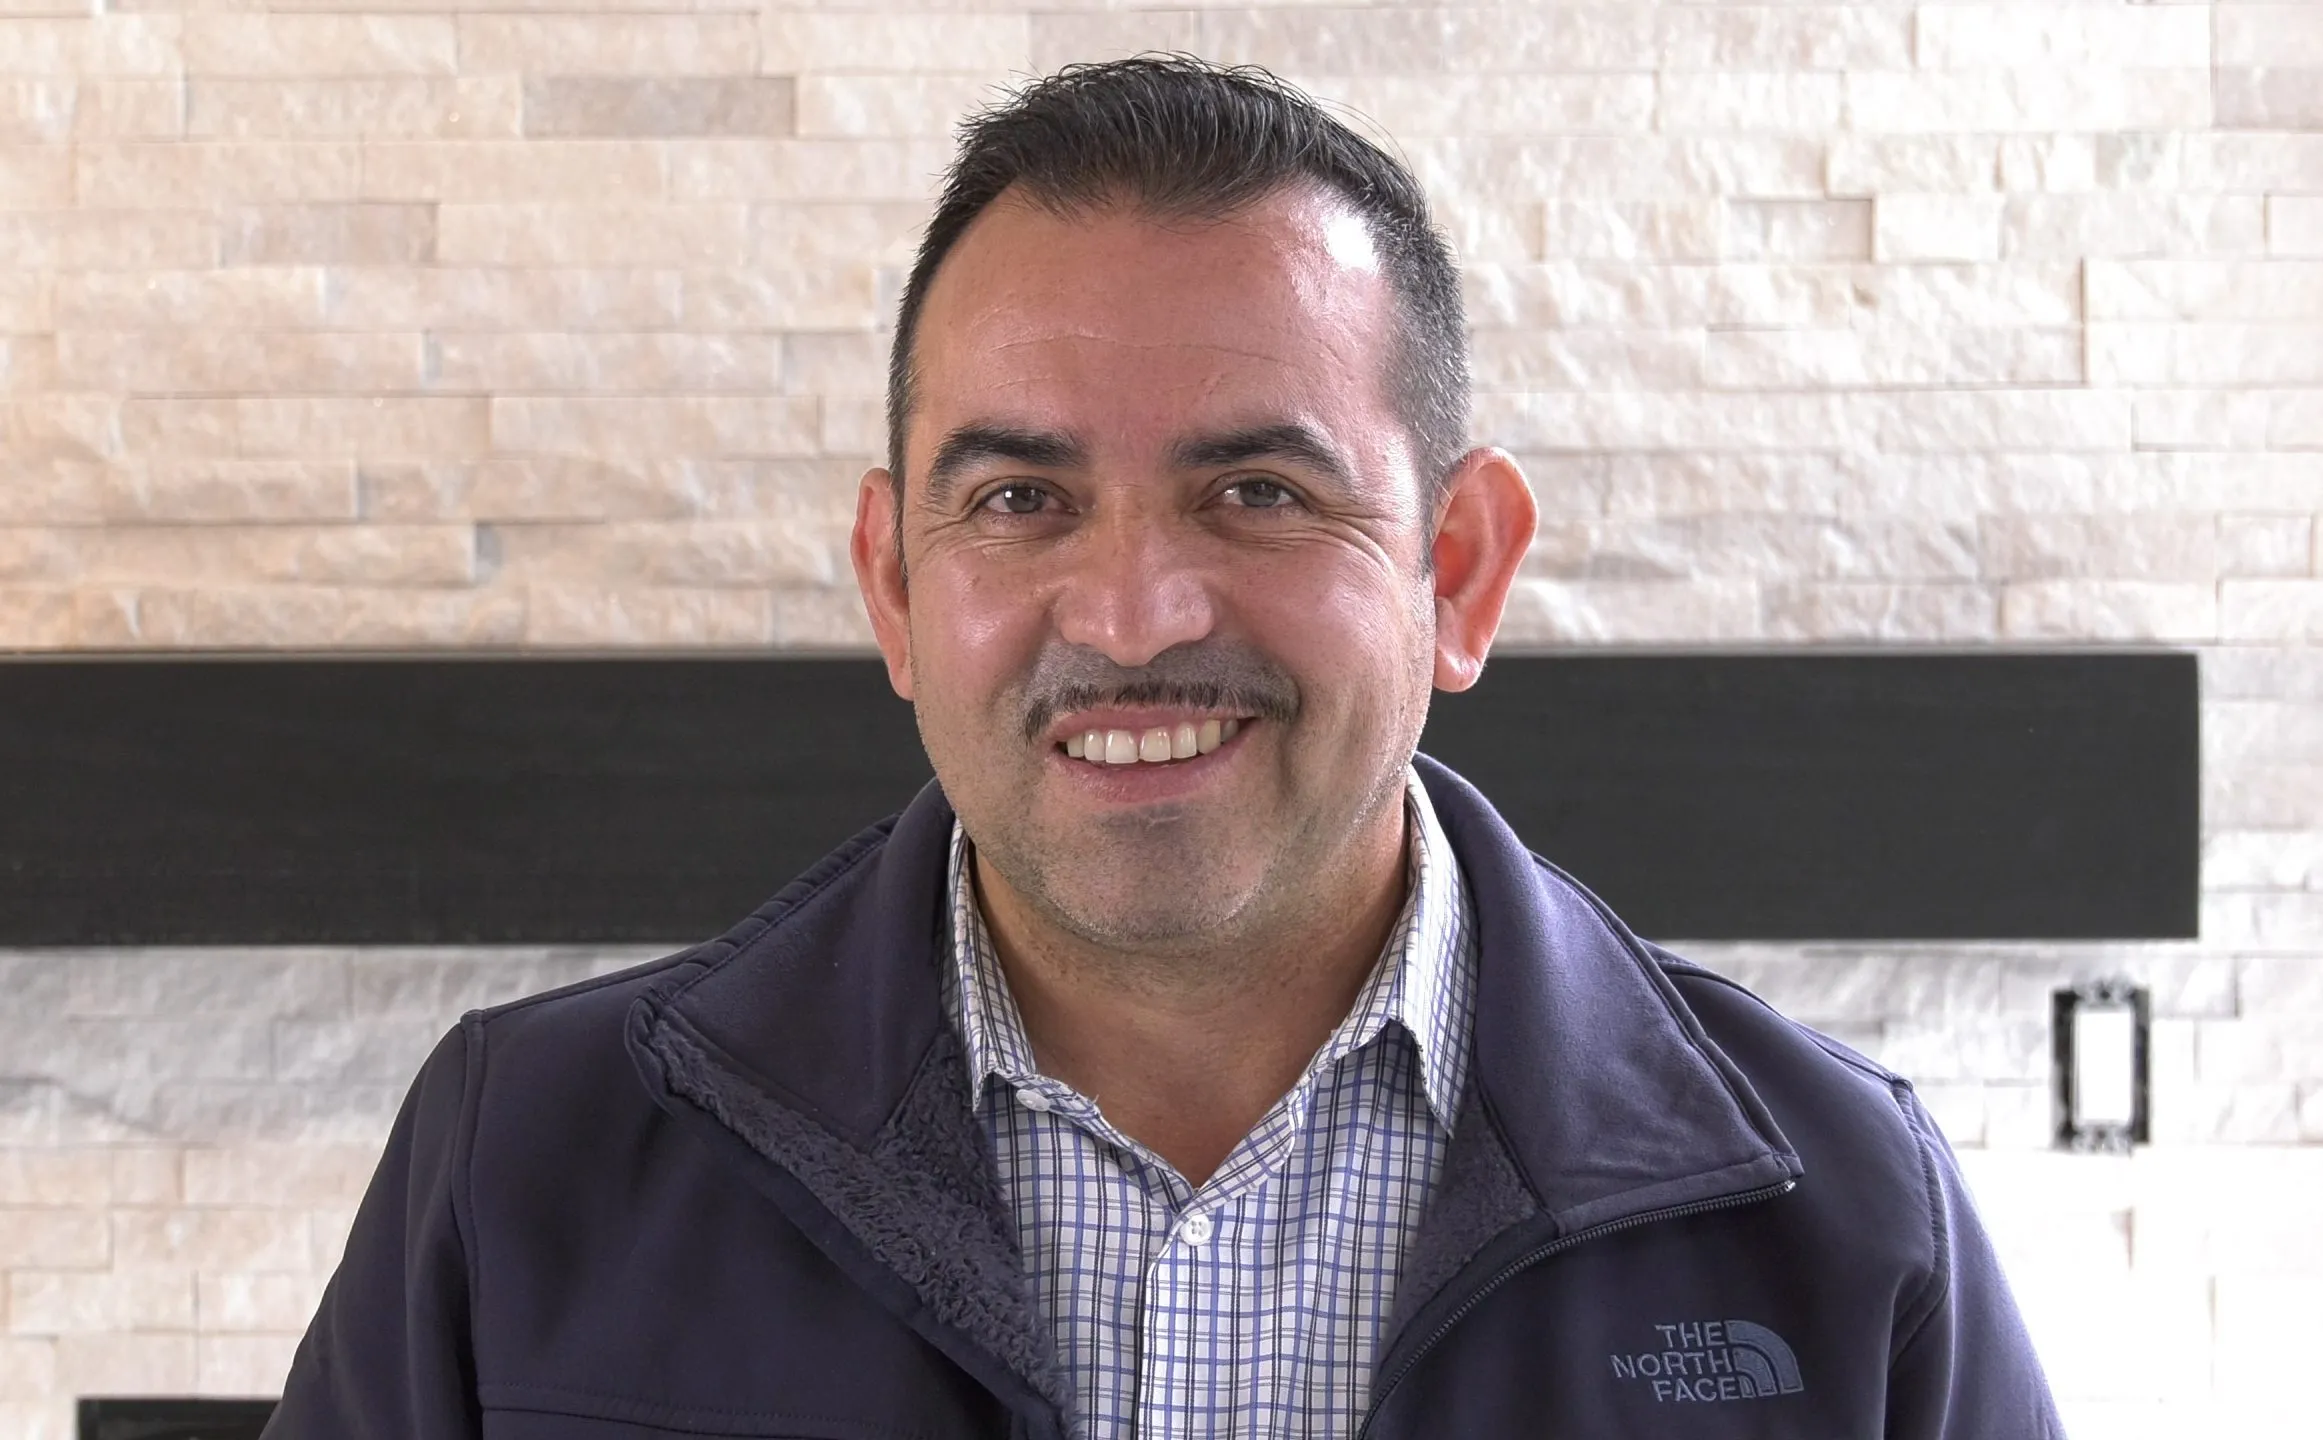 Roberto Ramos is owner of A Ramos Construction, Inc., a Diamond Certified company. He can be reached at (925) 235-4719 or by email.